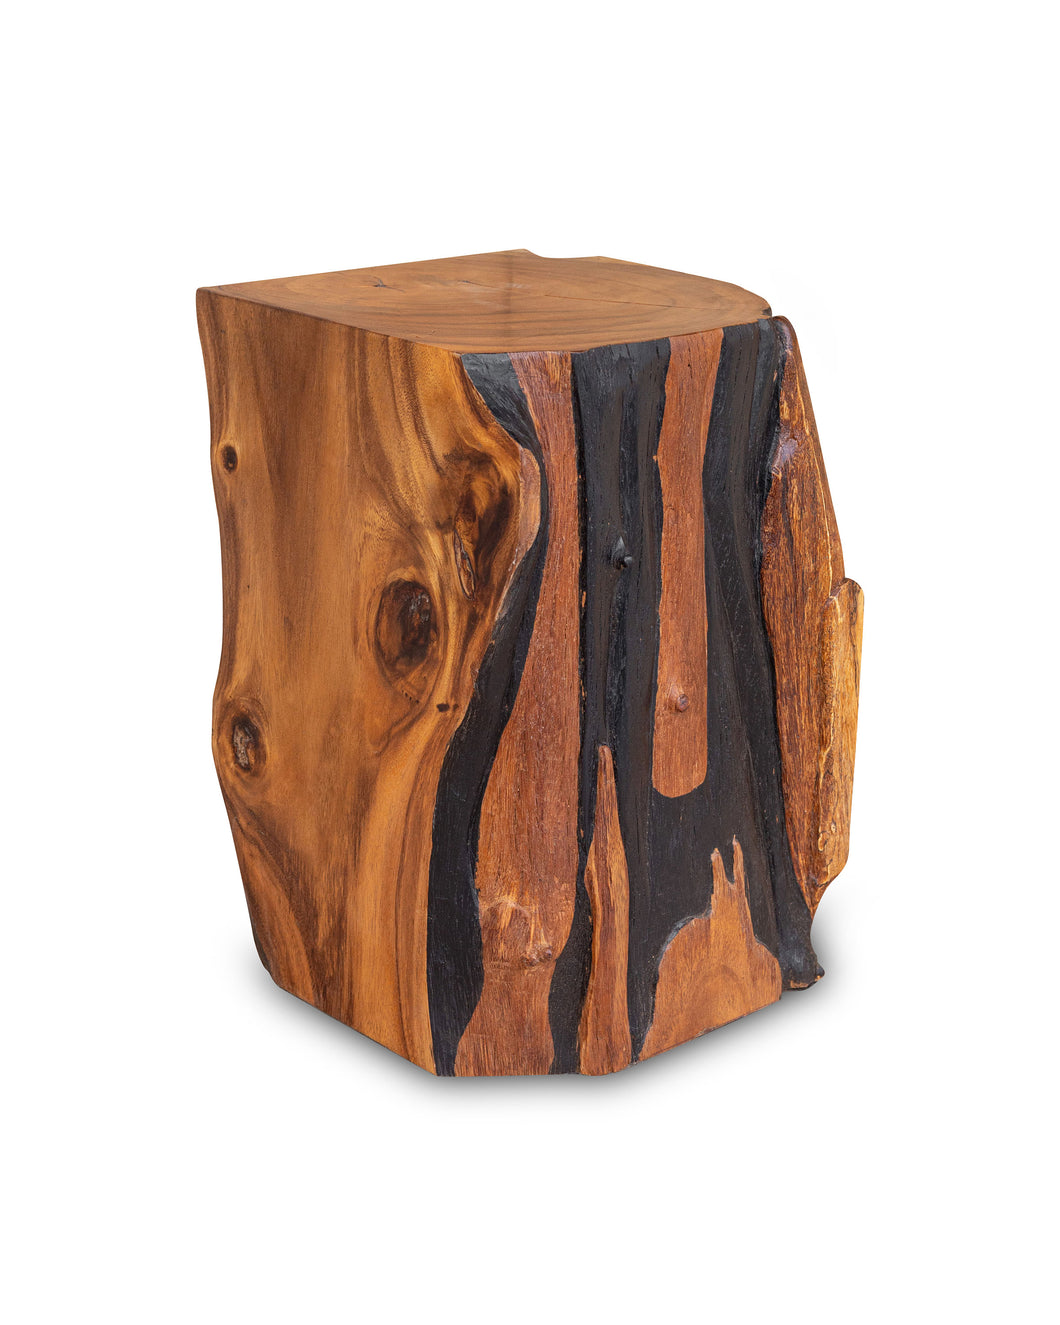 Square Solid Acacia Wood Side Table, Black and Brown Natural Tree Stump Stool or End Table #5